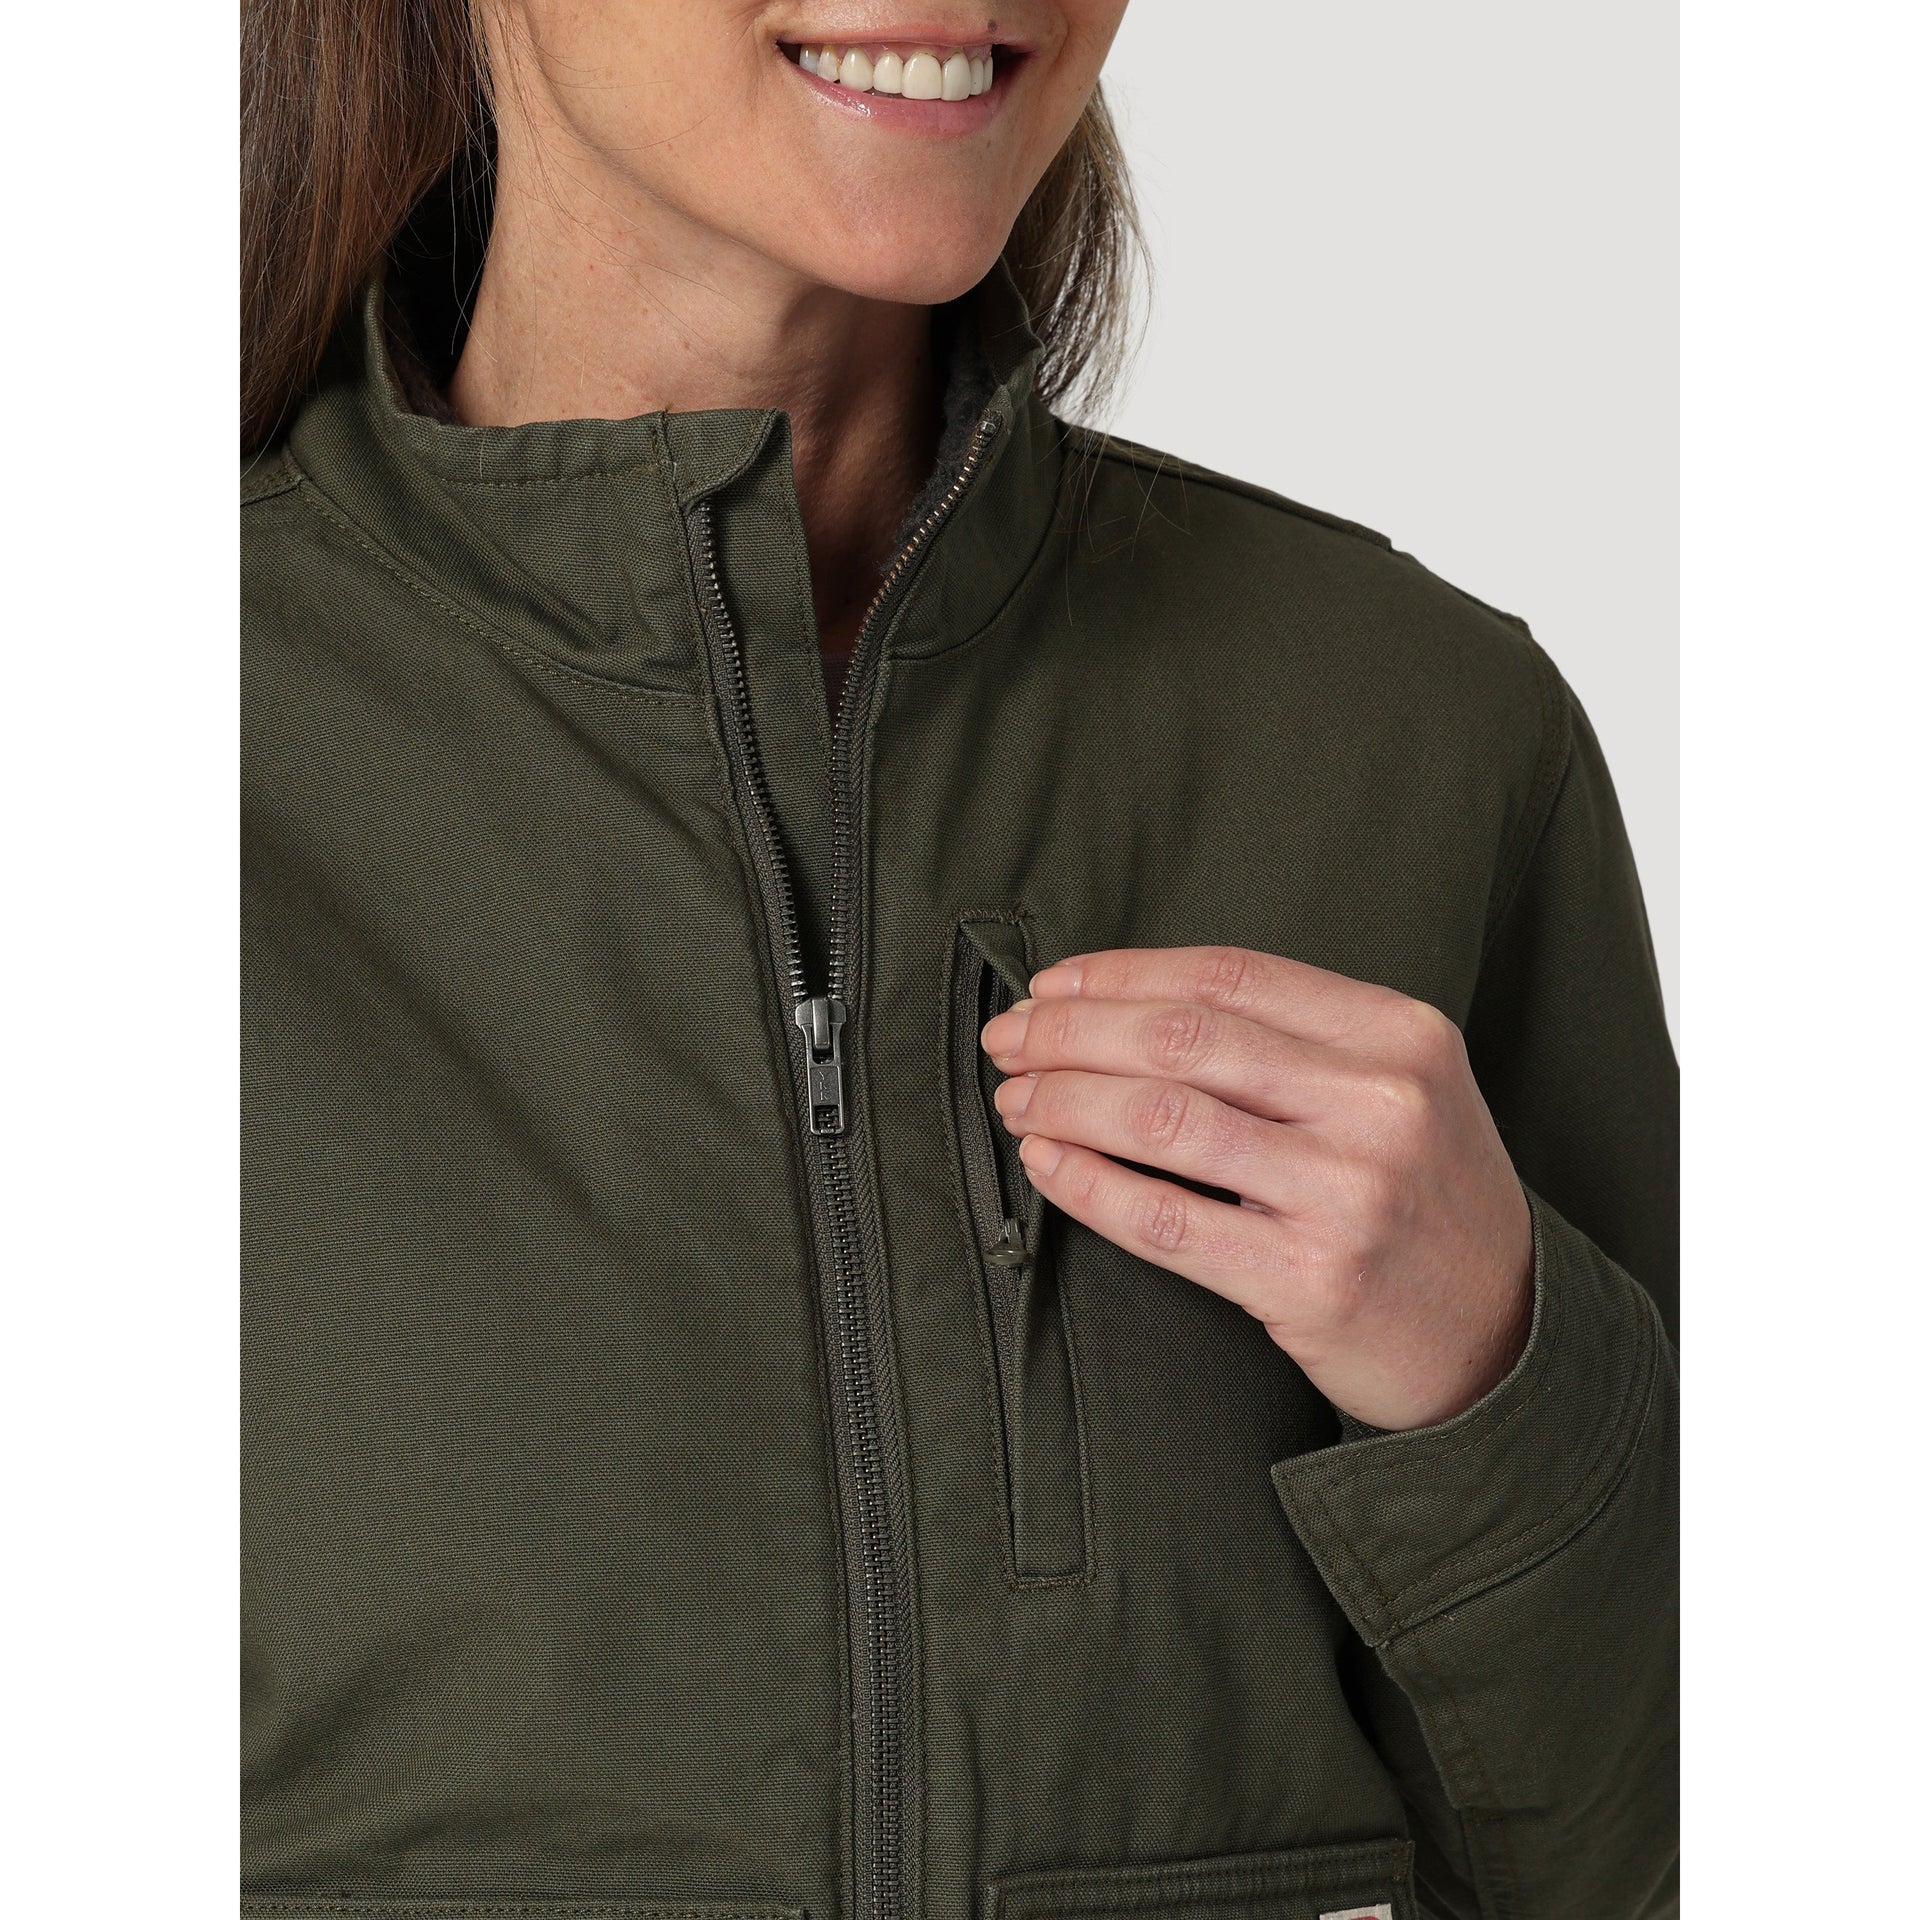 Wrangler Women's RIGGS Sherpa Lined Canvas Jacket - Green